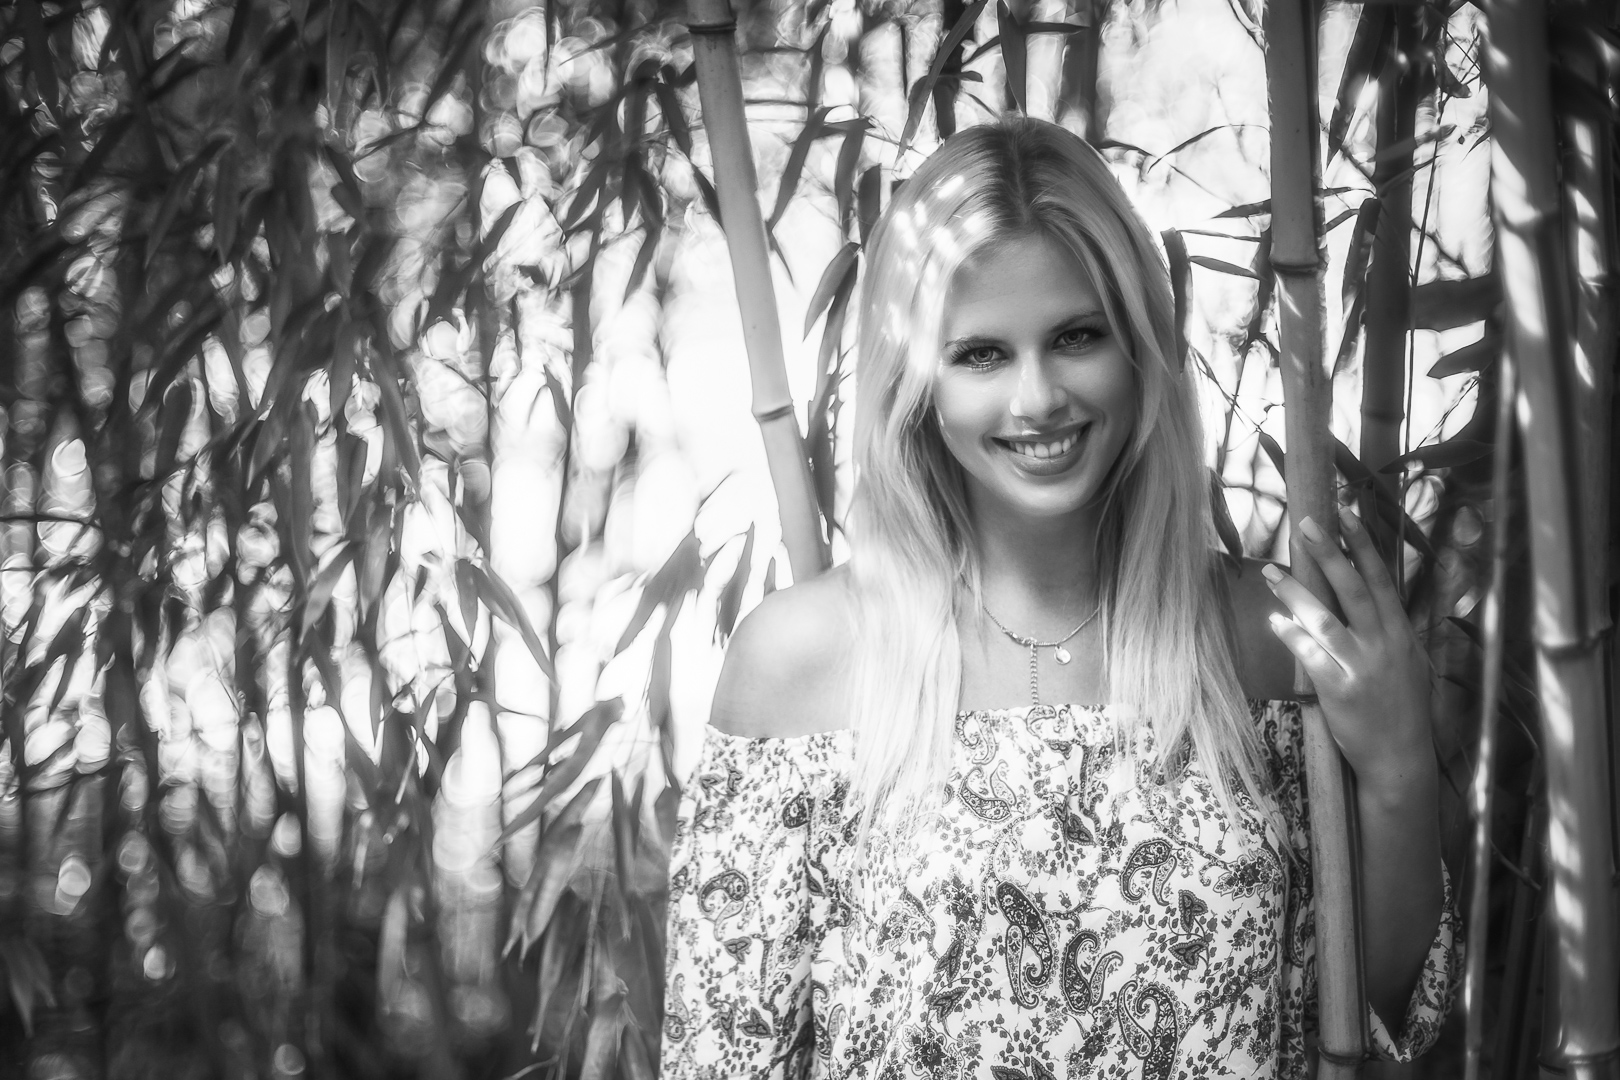 One of the most difficult genres in photography is the art of portraits. I have started my new journey and hope that I can develop the inner eye during the travel. I hope you like it.

Title: Let it be light in the bamboo garden...
Series: Streetfashion portrait in B&W
Model: @katha_bre91

In my new feed I want to share portraits, wedding, baptism, pair, family and street fashion shootings.

My other two accounts focus more on nature and cities (@dont_fade_away_photography) or on cosplay photography (@dont_fade_away_photography_cos)